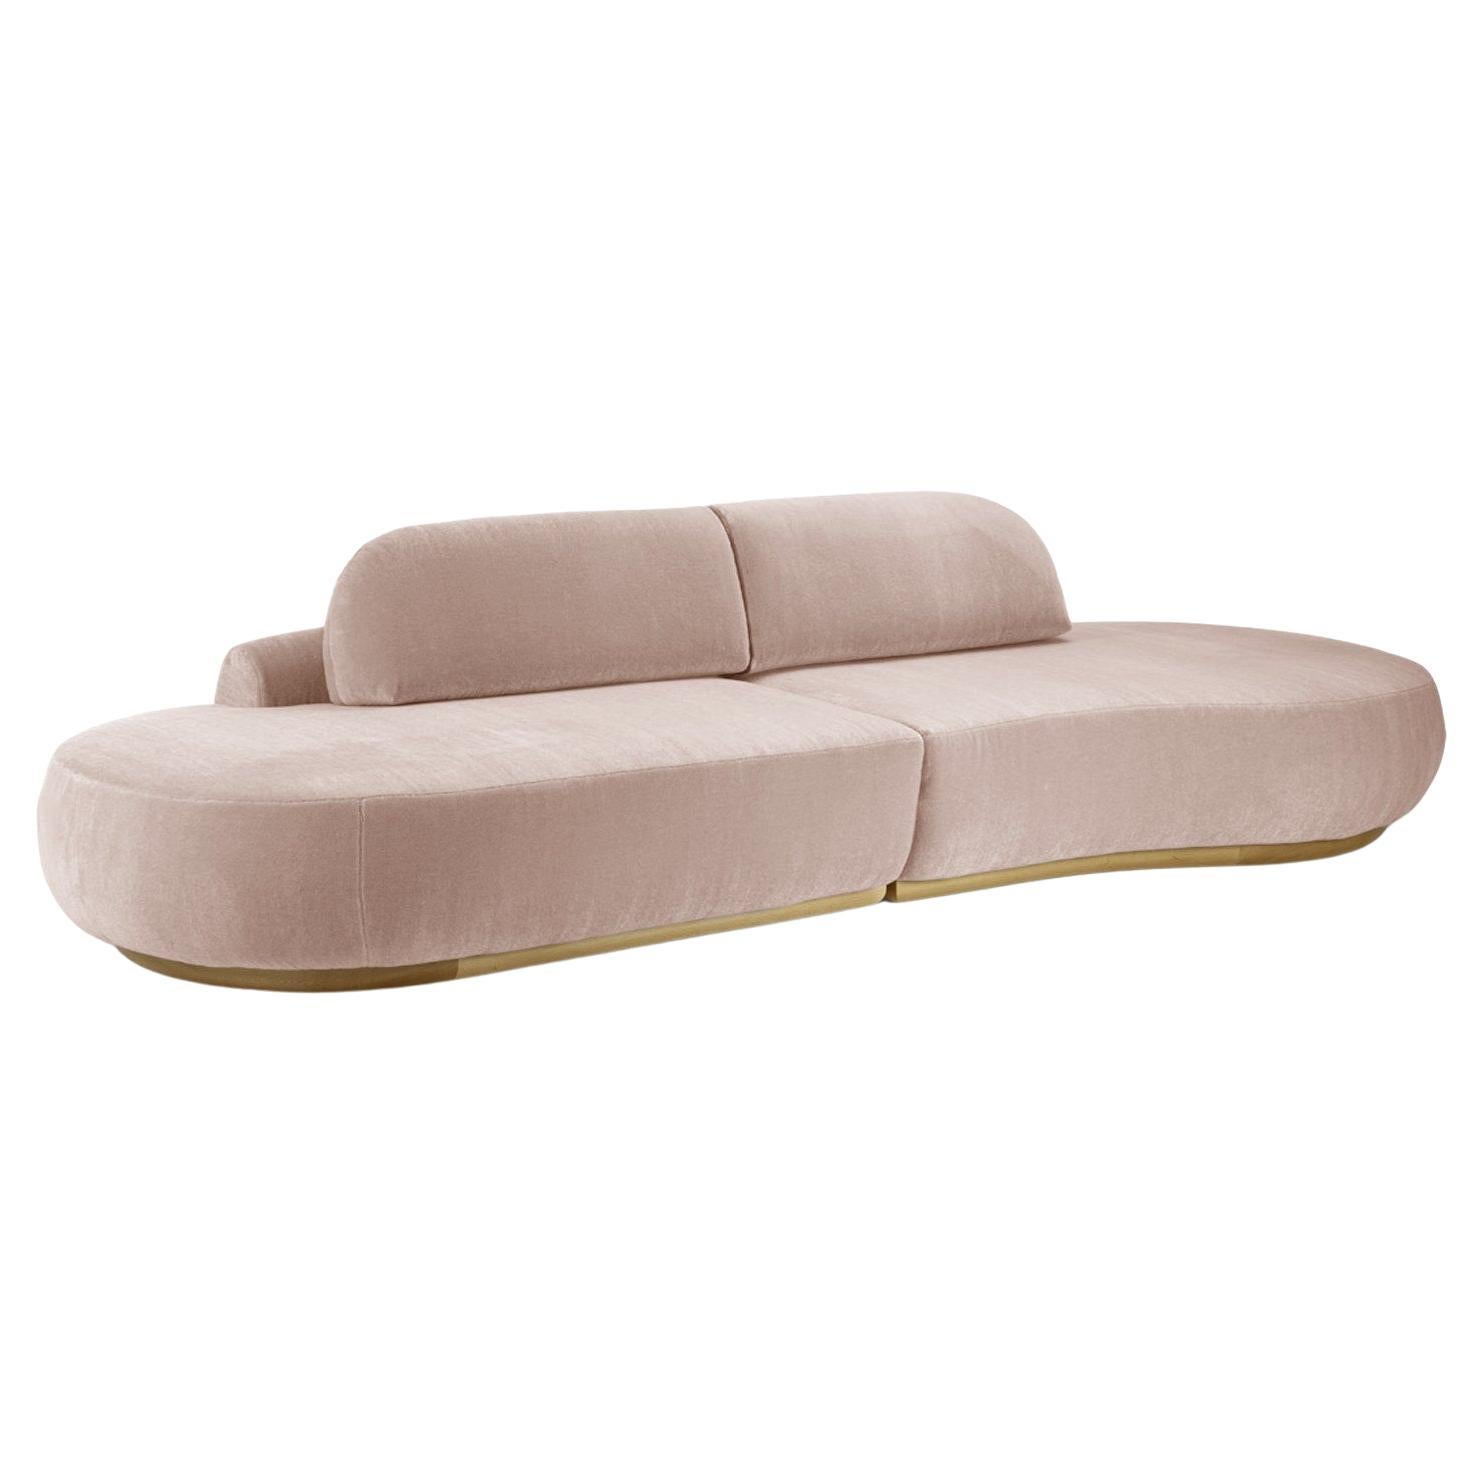 Naked Curved Sectional Sofa, 2 Piece with Natural Oak and Vigo Blossom For Sale